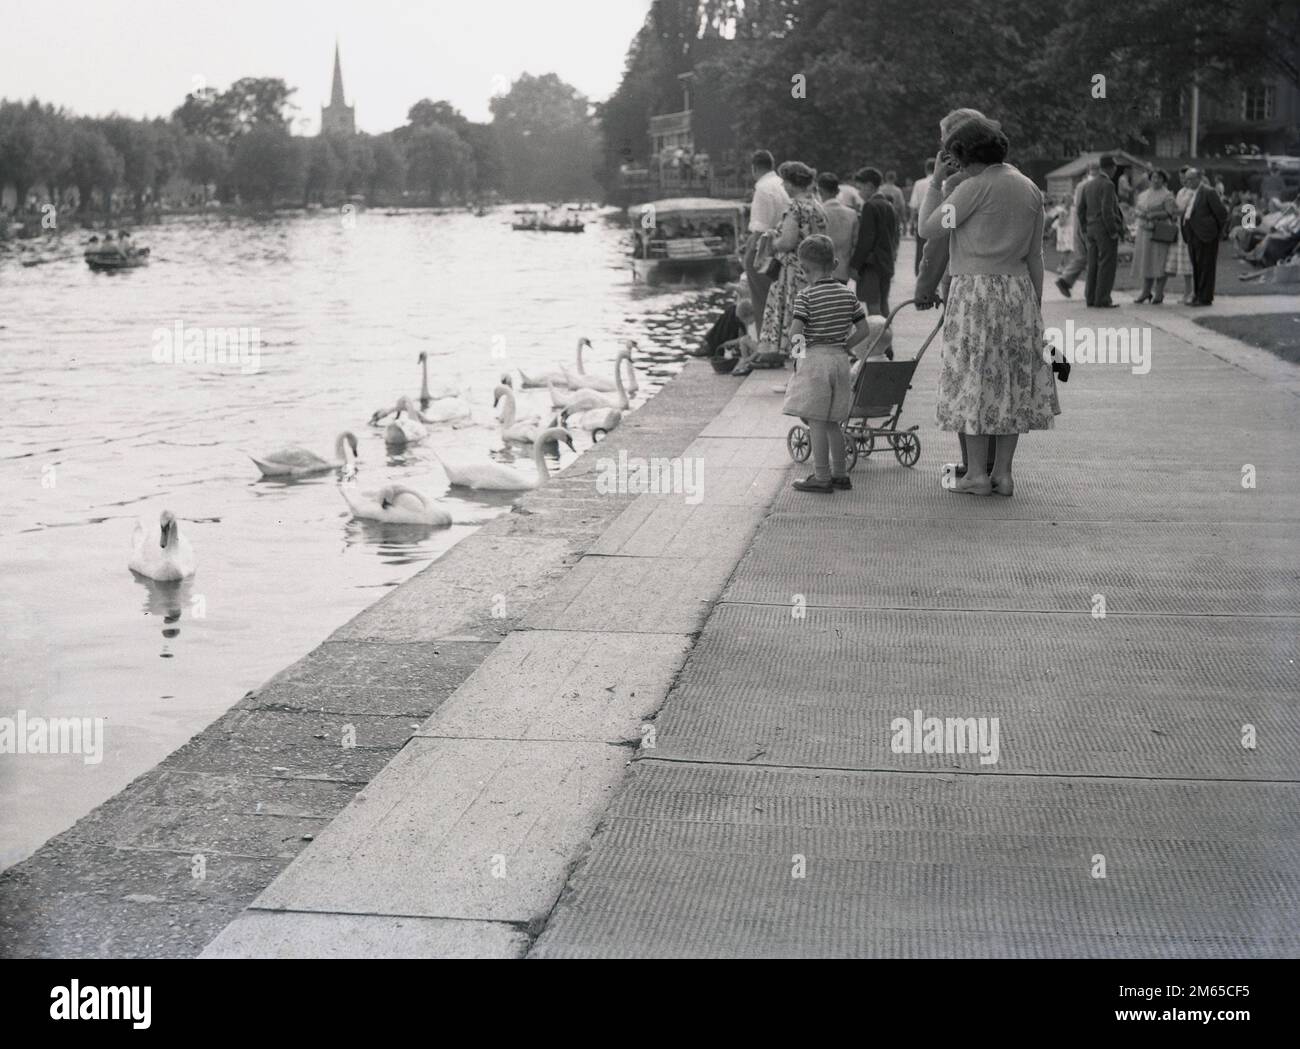 1950s, historical, people feeding the swans on a walkway or path beside the river Avon at Stratford upon Avon, Warwickshire, England, UK, famous as the birthplace town of English playwright, William Shakespeare. The spire of the Holy Trinty church located in the old town can be seen in the distance, the church where William Shakespeare was baptised, married and where he and his wife Anne Hathaway are buried. Stock Photo